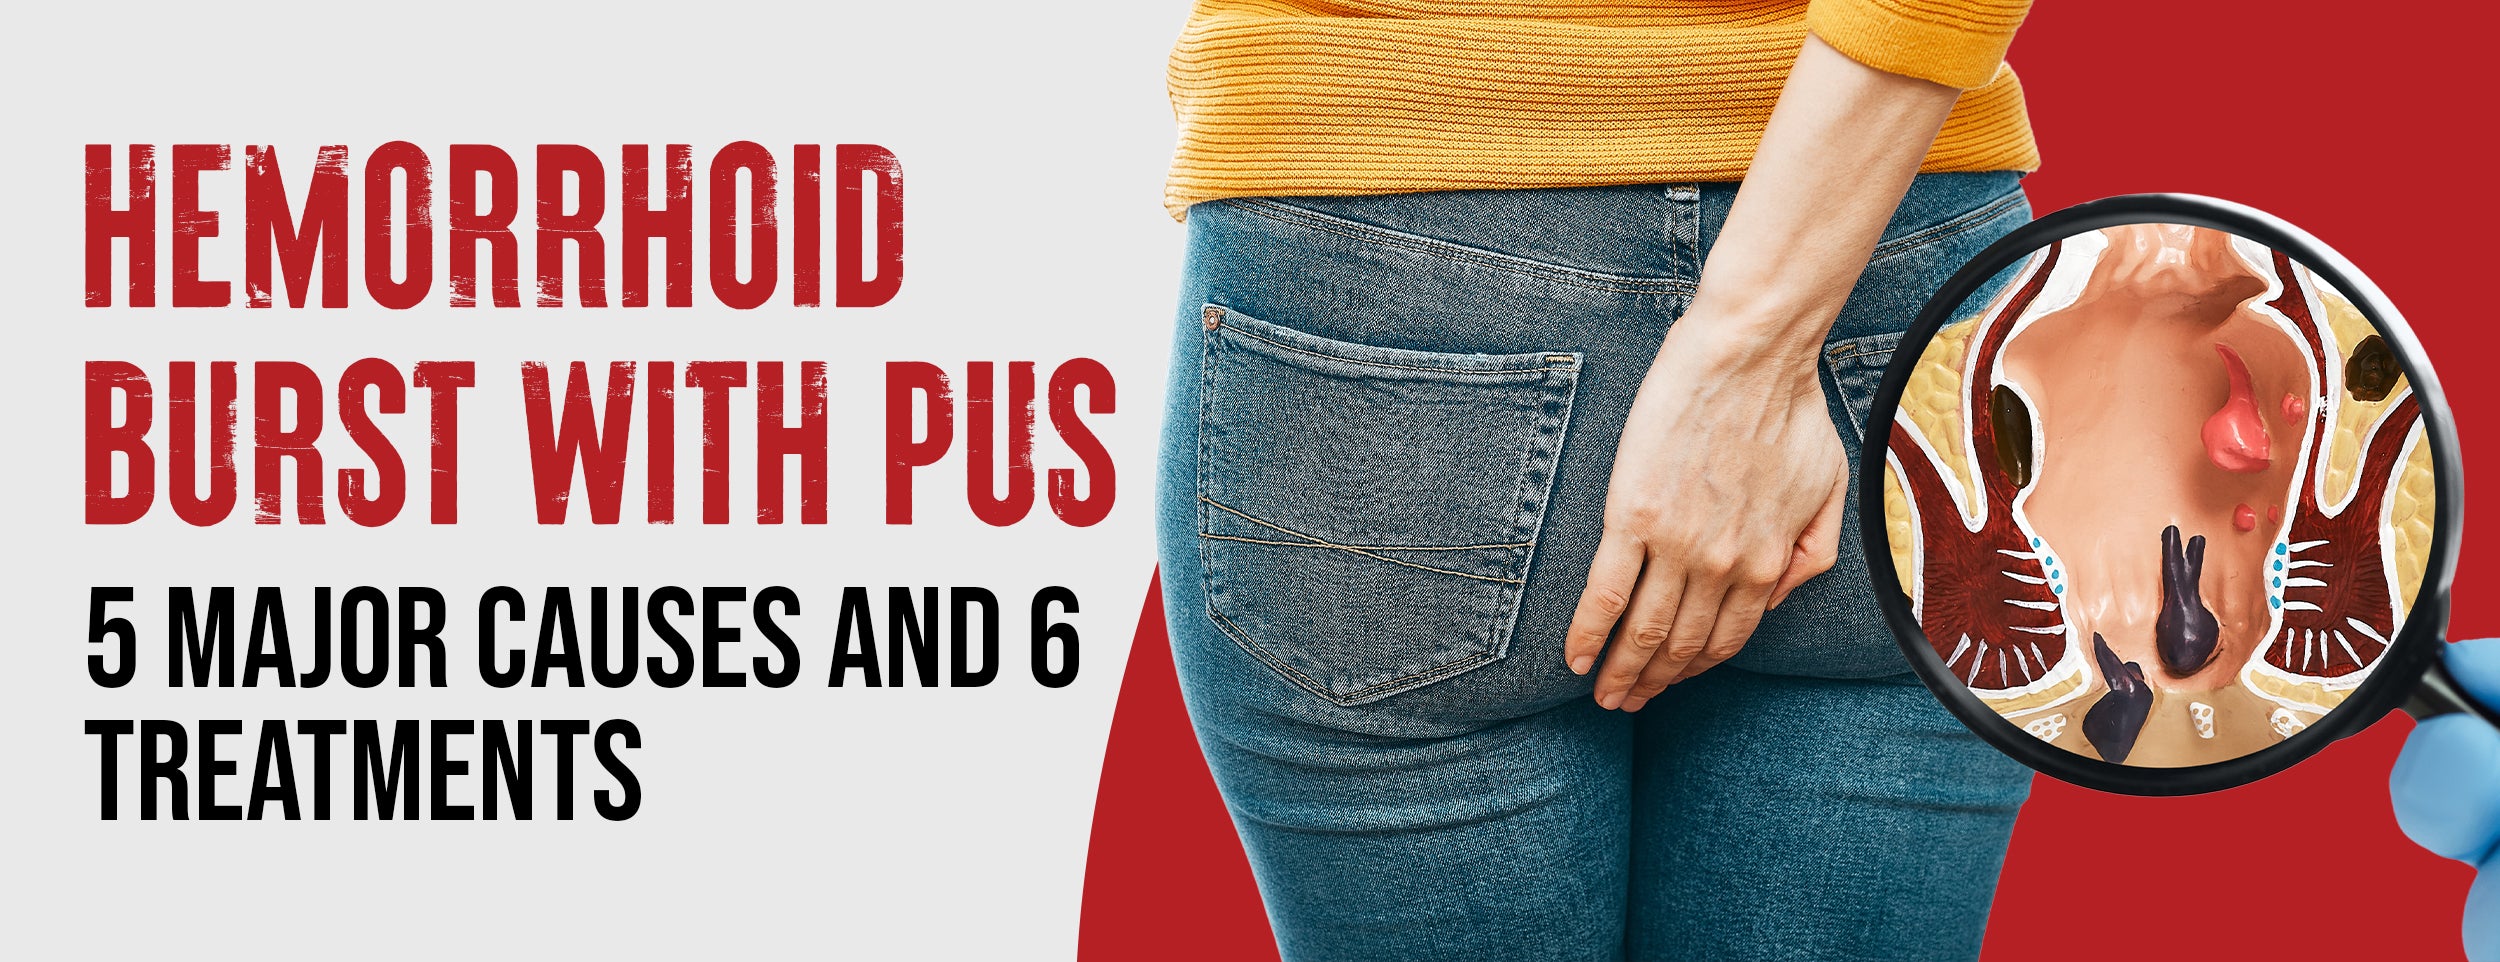 6 Best Treatments for Hemorrhoids with Pus & 5 Major Causes